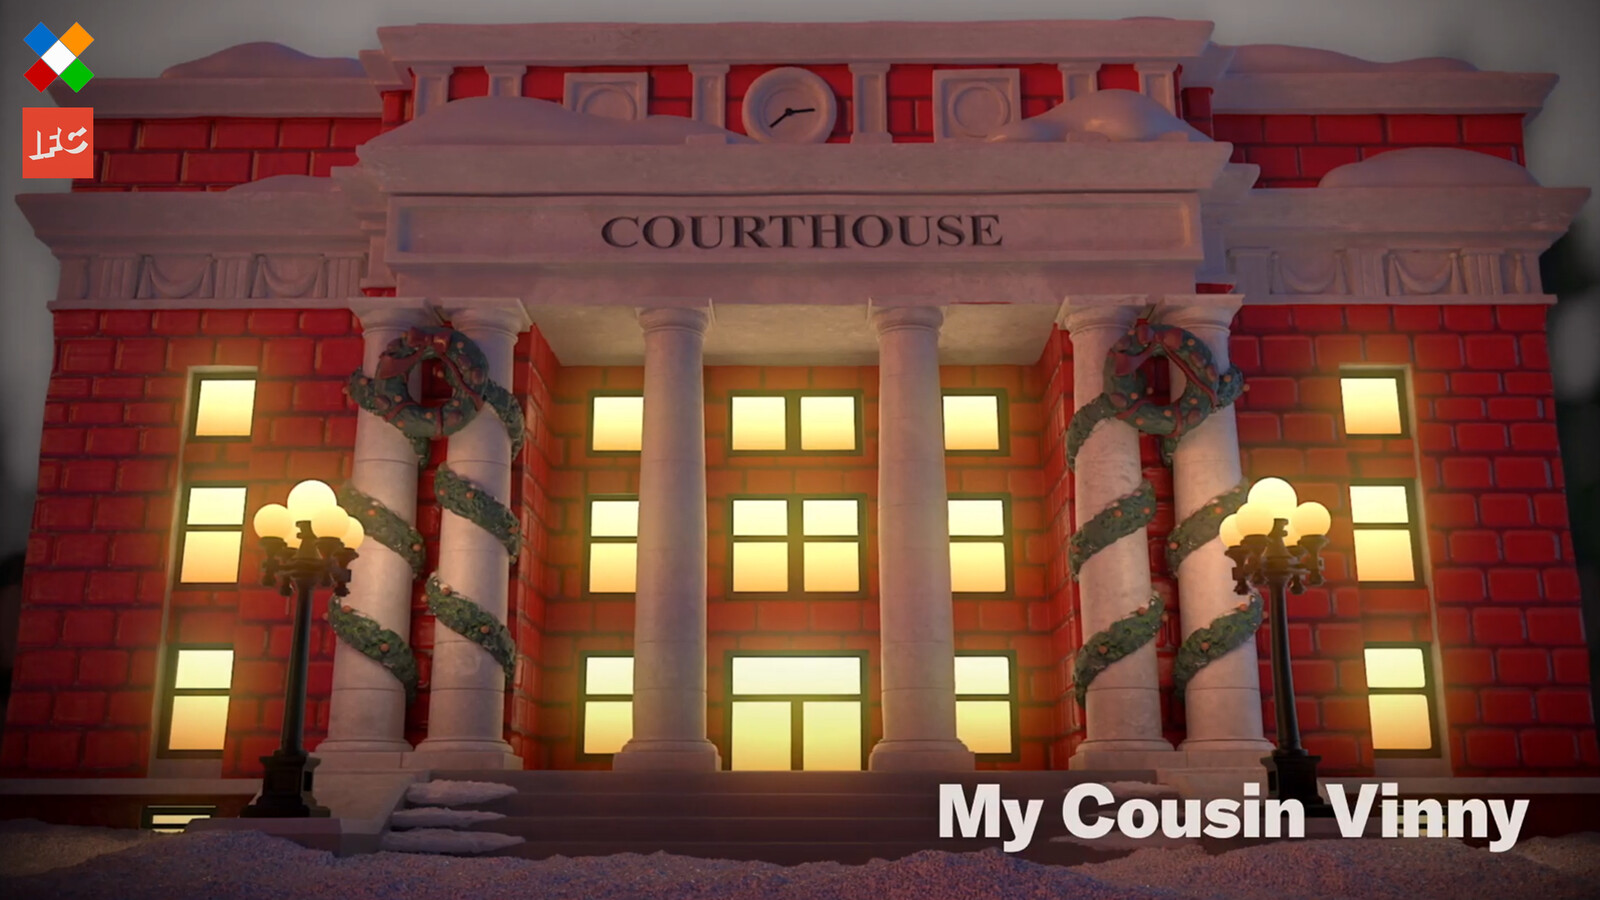 Courthouse final look in the spot. Responsible for Courthouse model and textures, minus the wreaths around it.